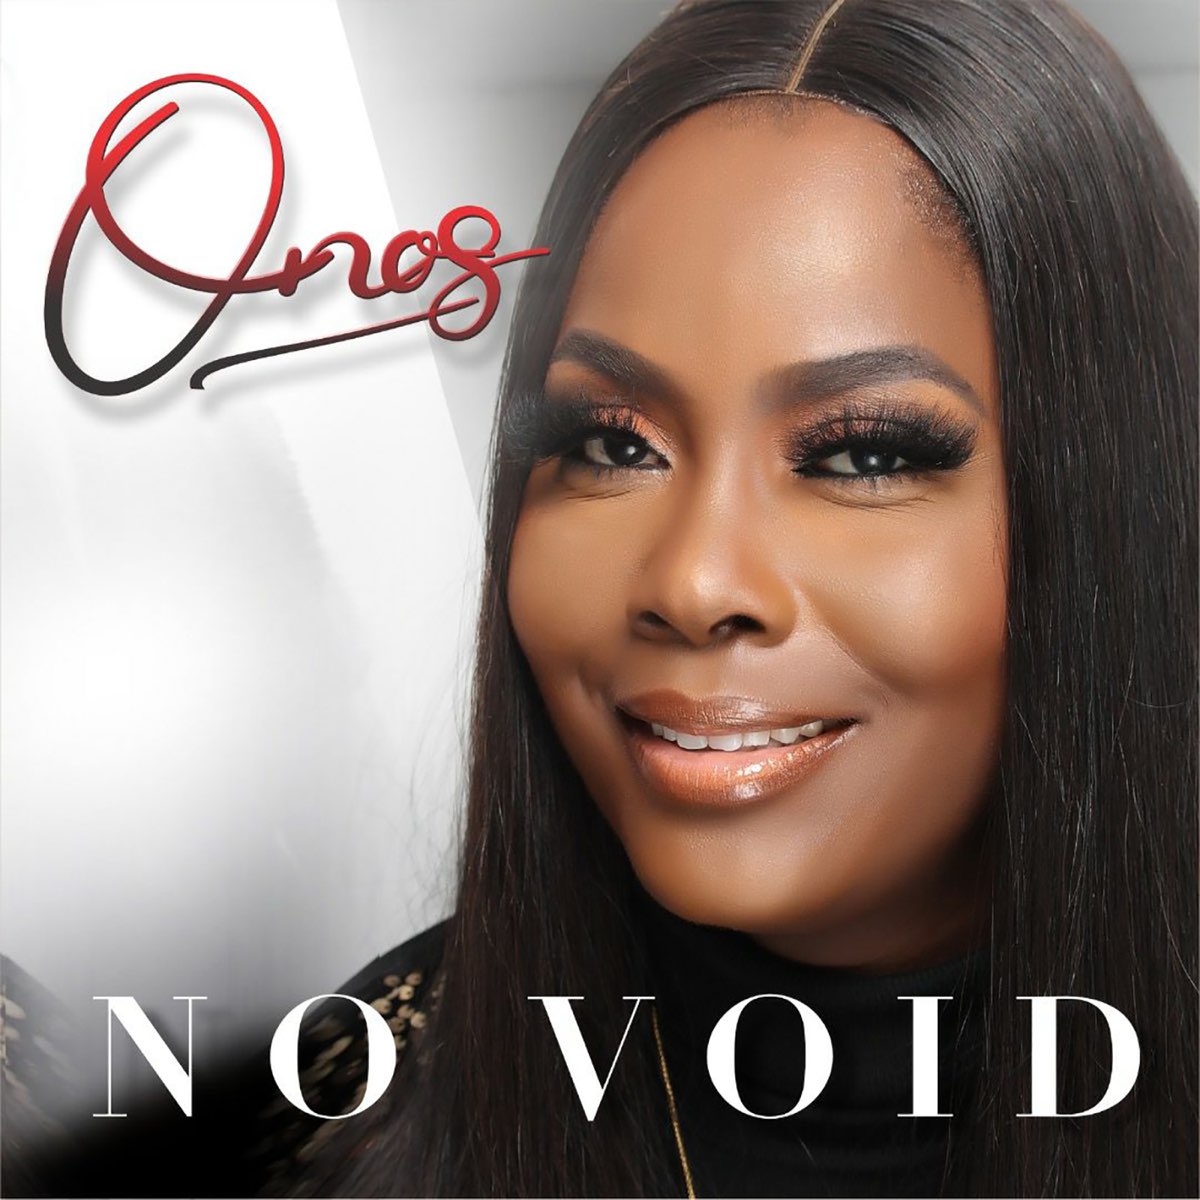 No Void - Single by Onos on Apple Music